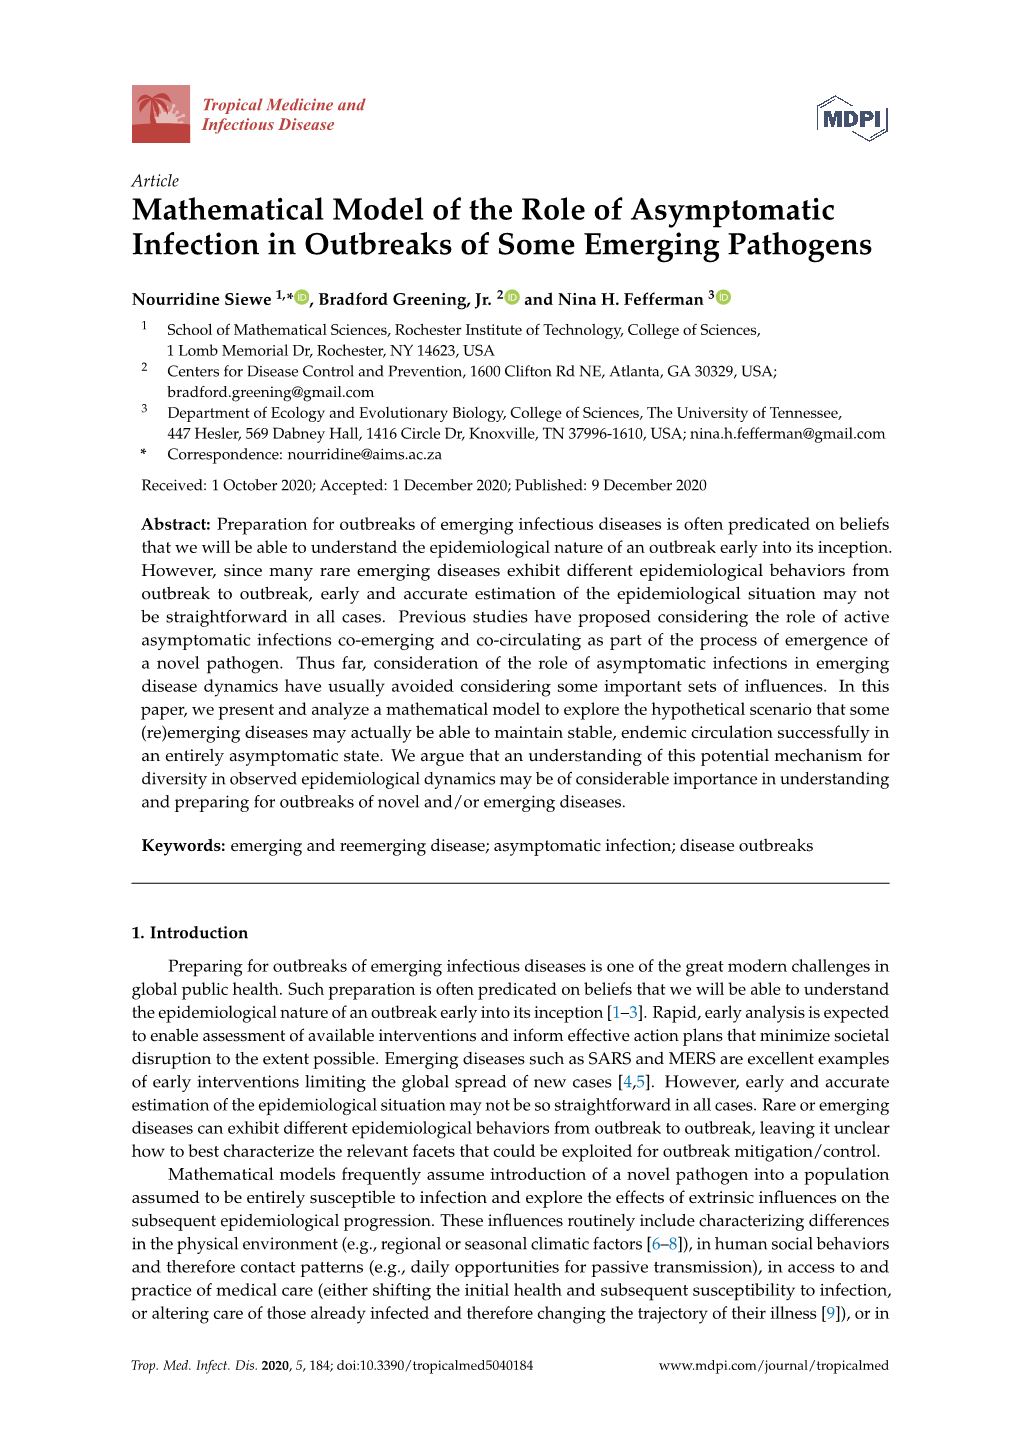 Mathematical Model of the Role of Asymptomatic Infection in Outbreaks of Some Emerging Pathogens